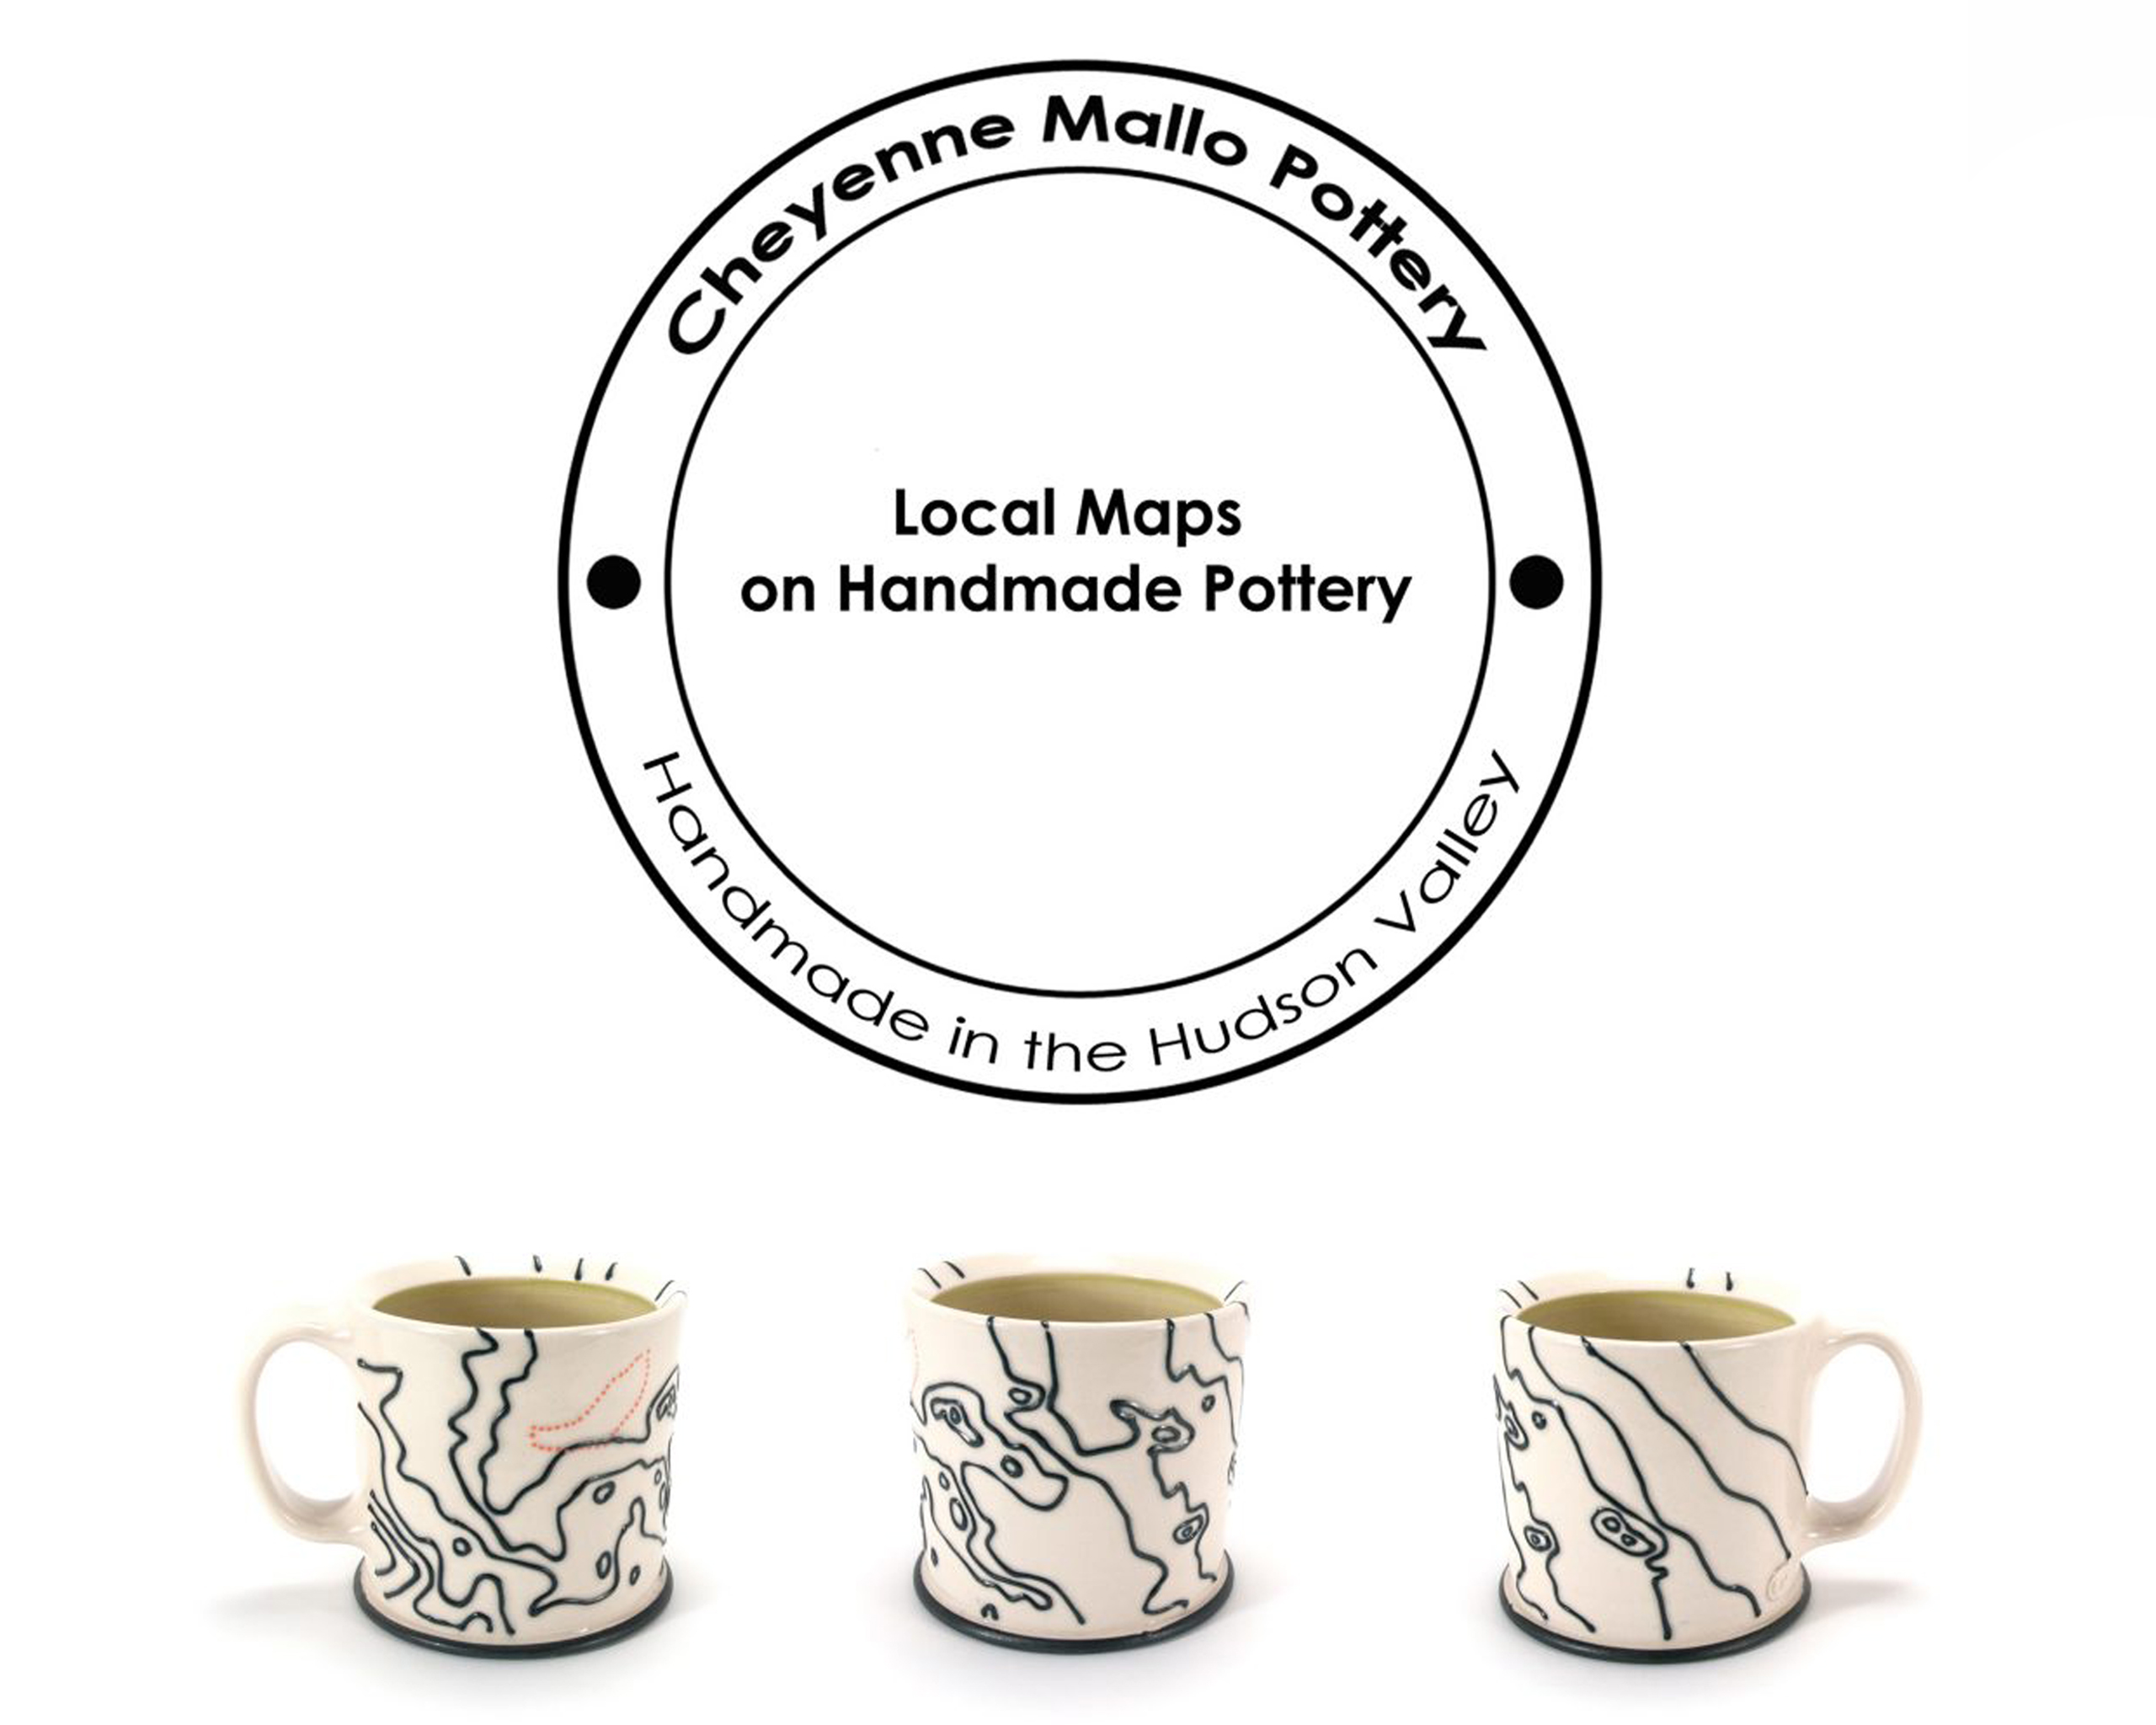 Local Maps on Handmade Pottery by Cheyenne Mallo Pottery. Handmade in the Hudson Valley.